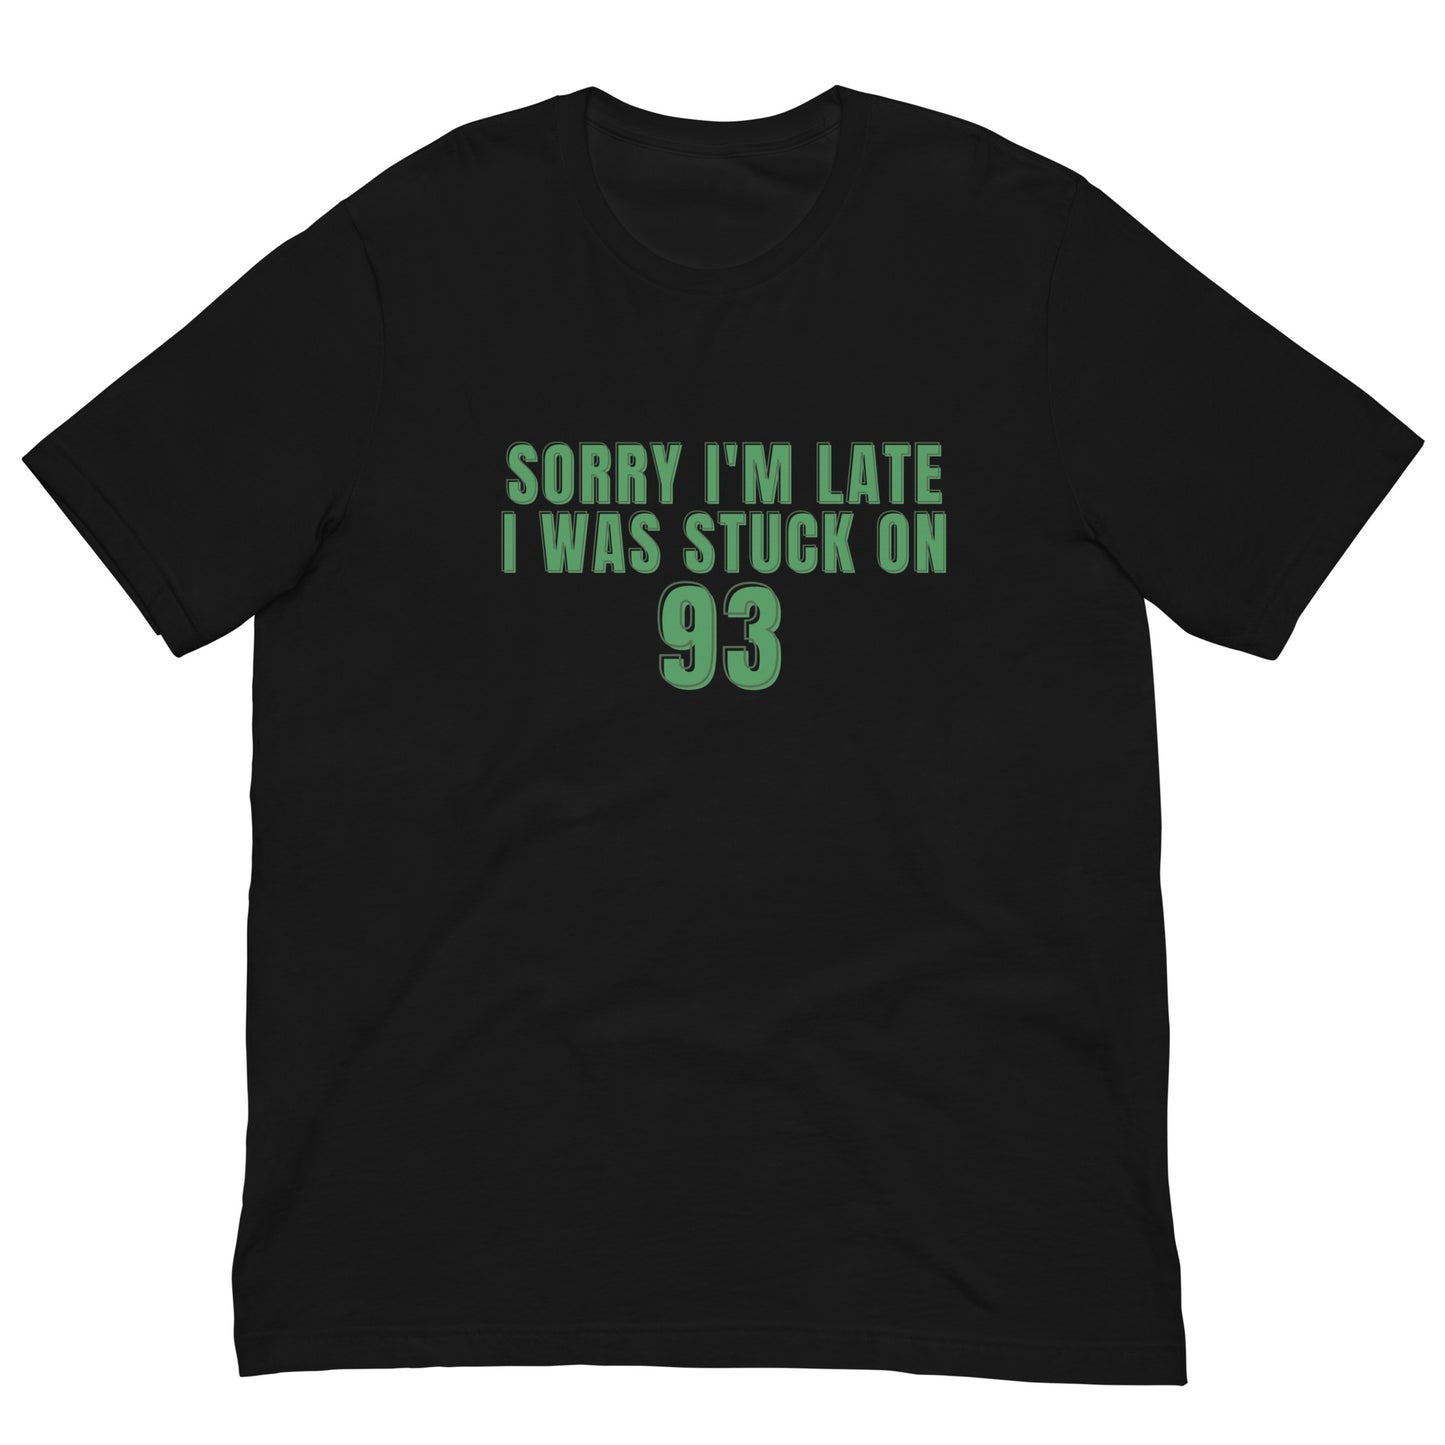 black tshirt that says "sorry i'm late i was stuck on 93" in green lettering